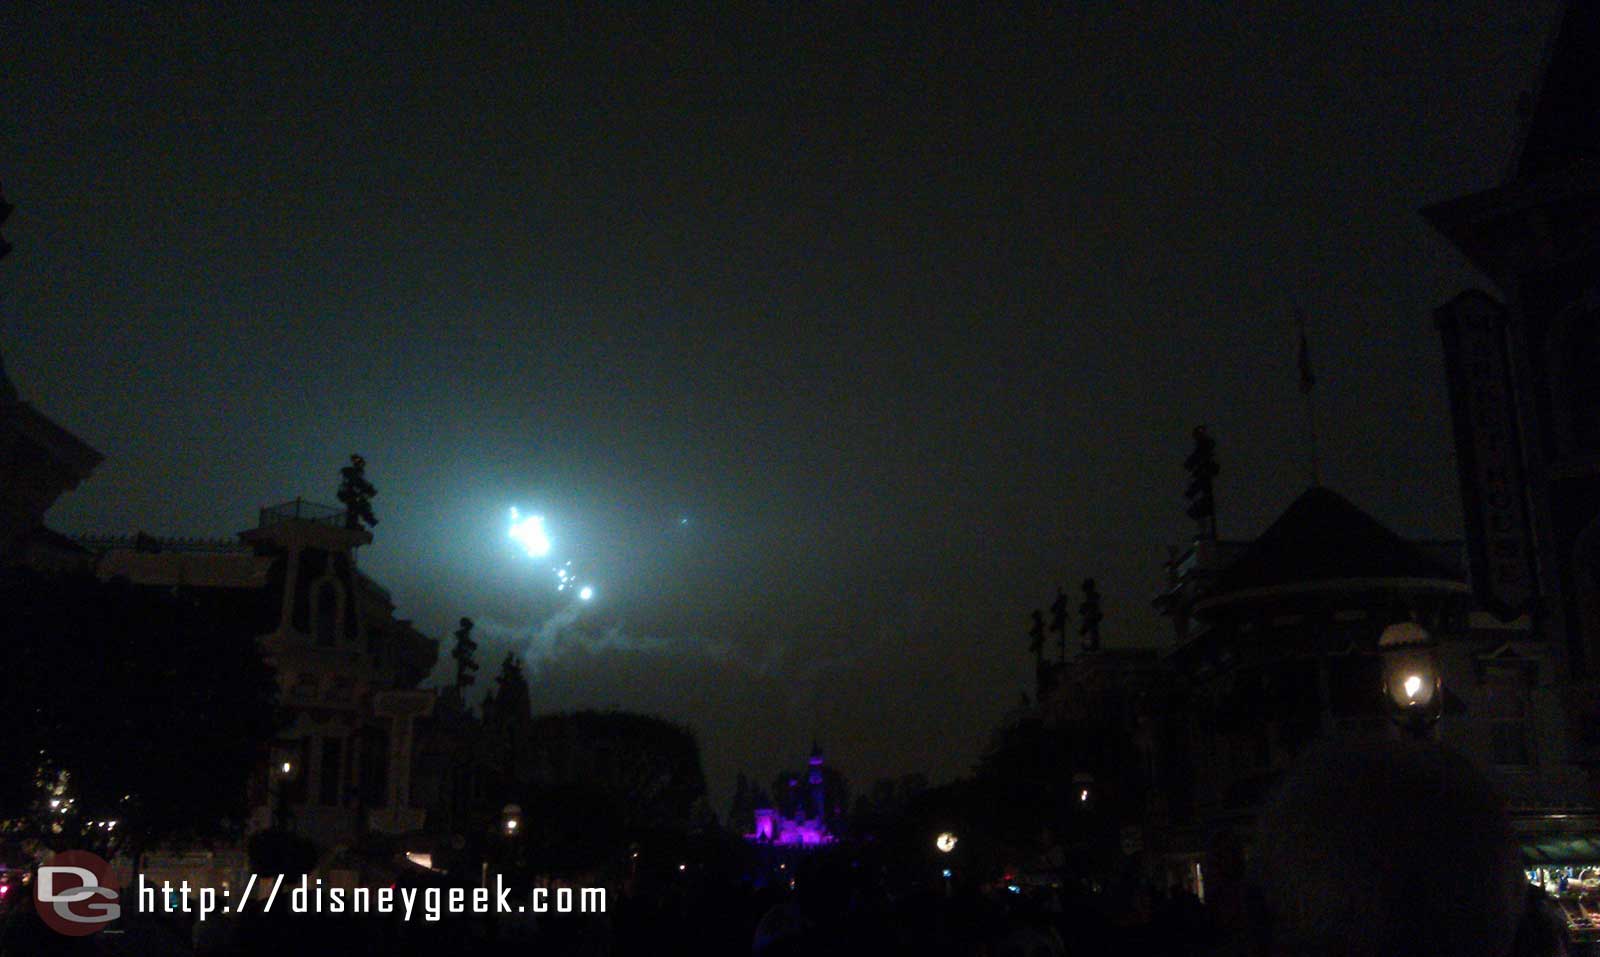 A little foggy this evening for Remember Dreams Come True